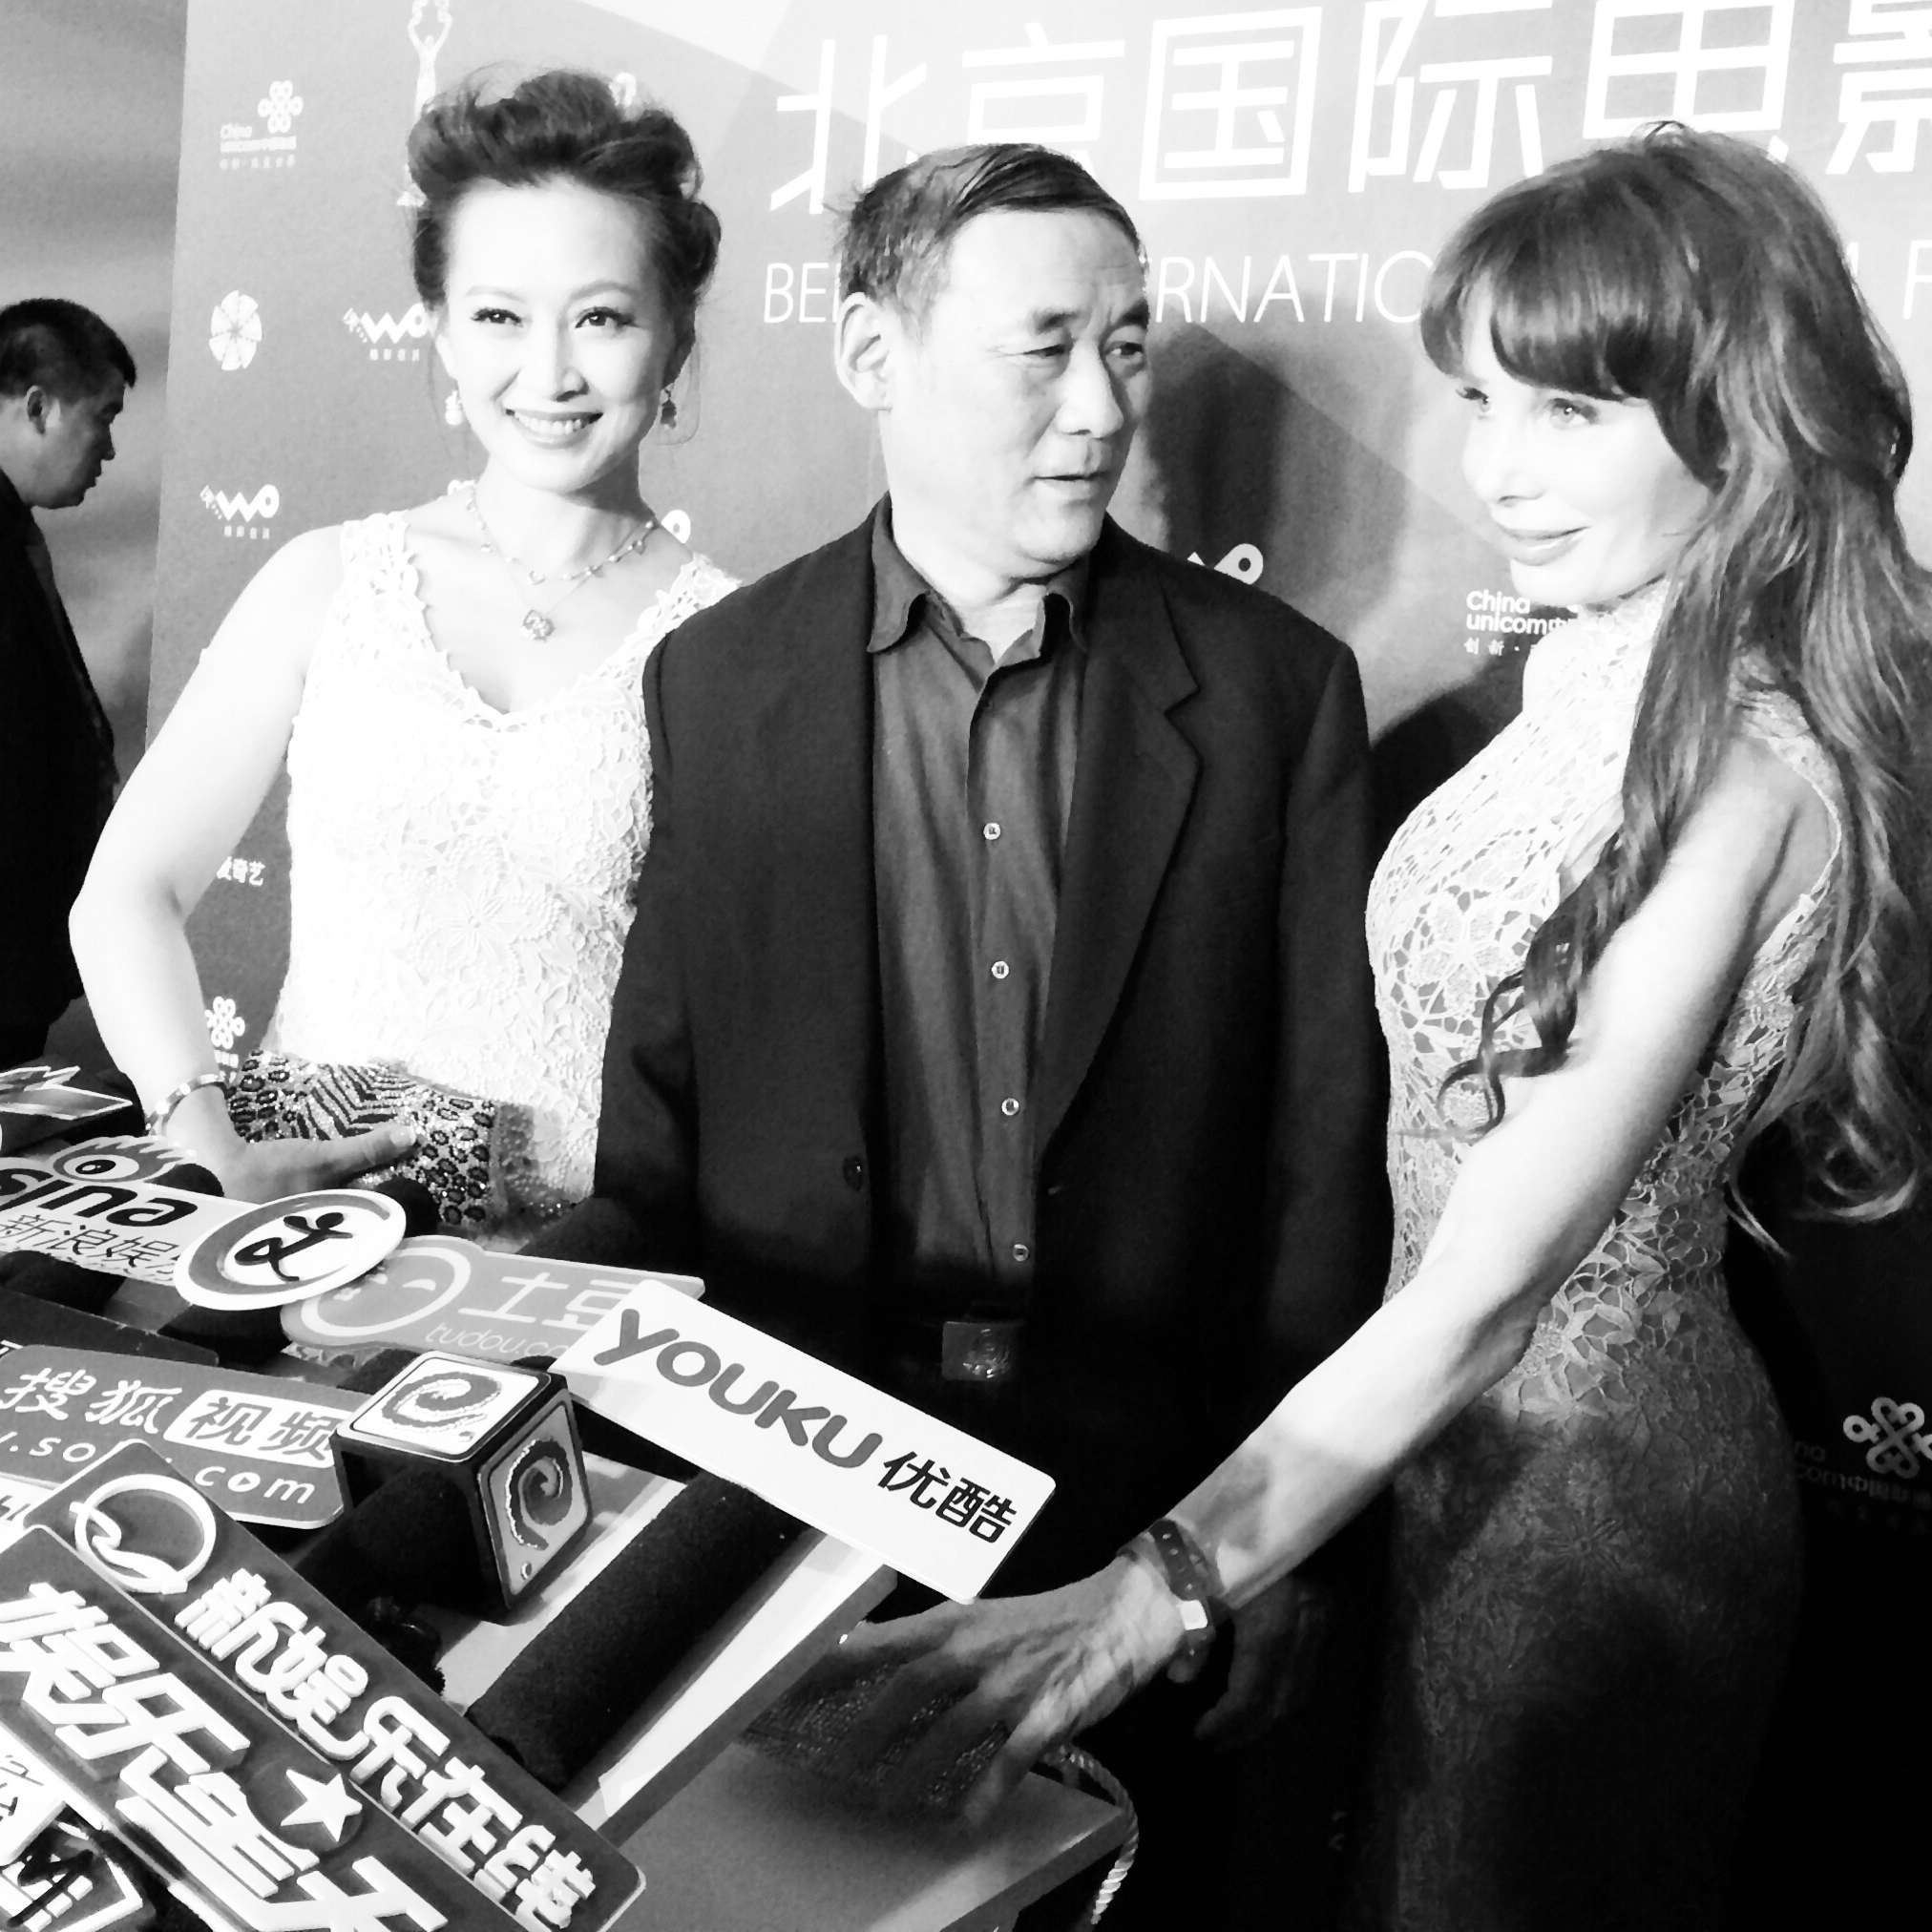 4th Annual Beijing International Film Festival - Actress Lucy Yang, Vice President Beijing International Film Festival, Producer/Actress, Kimberley Kates